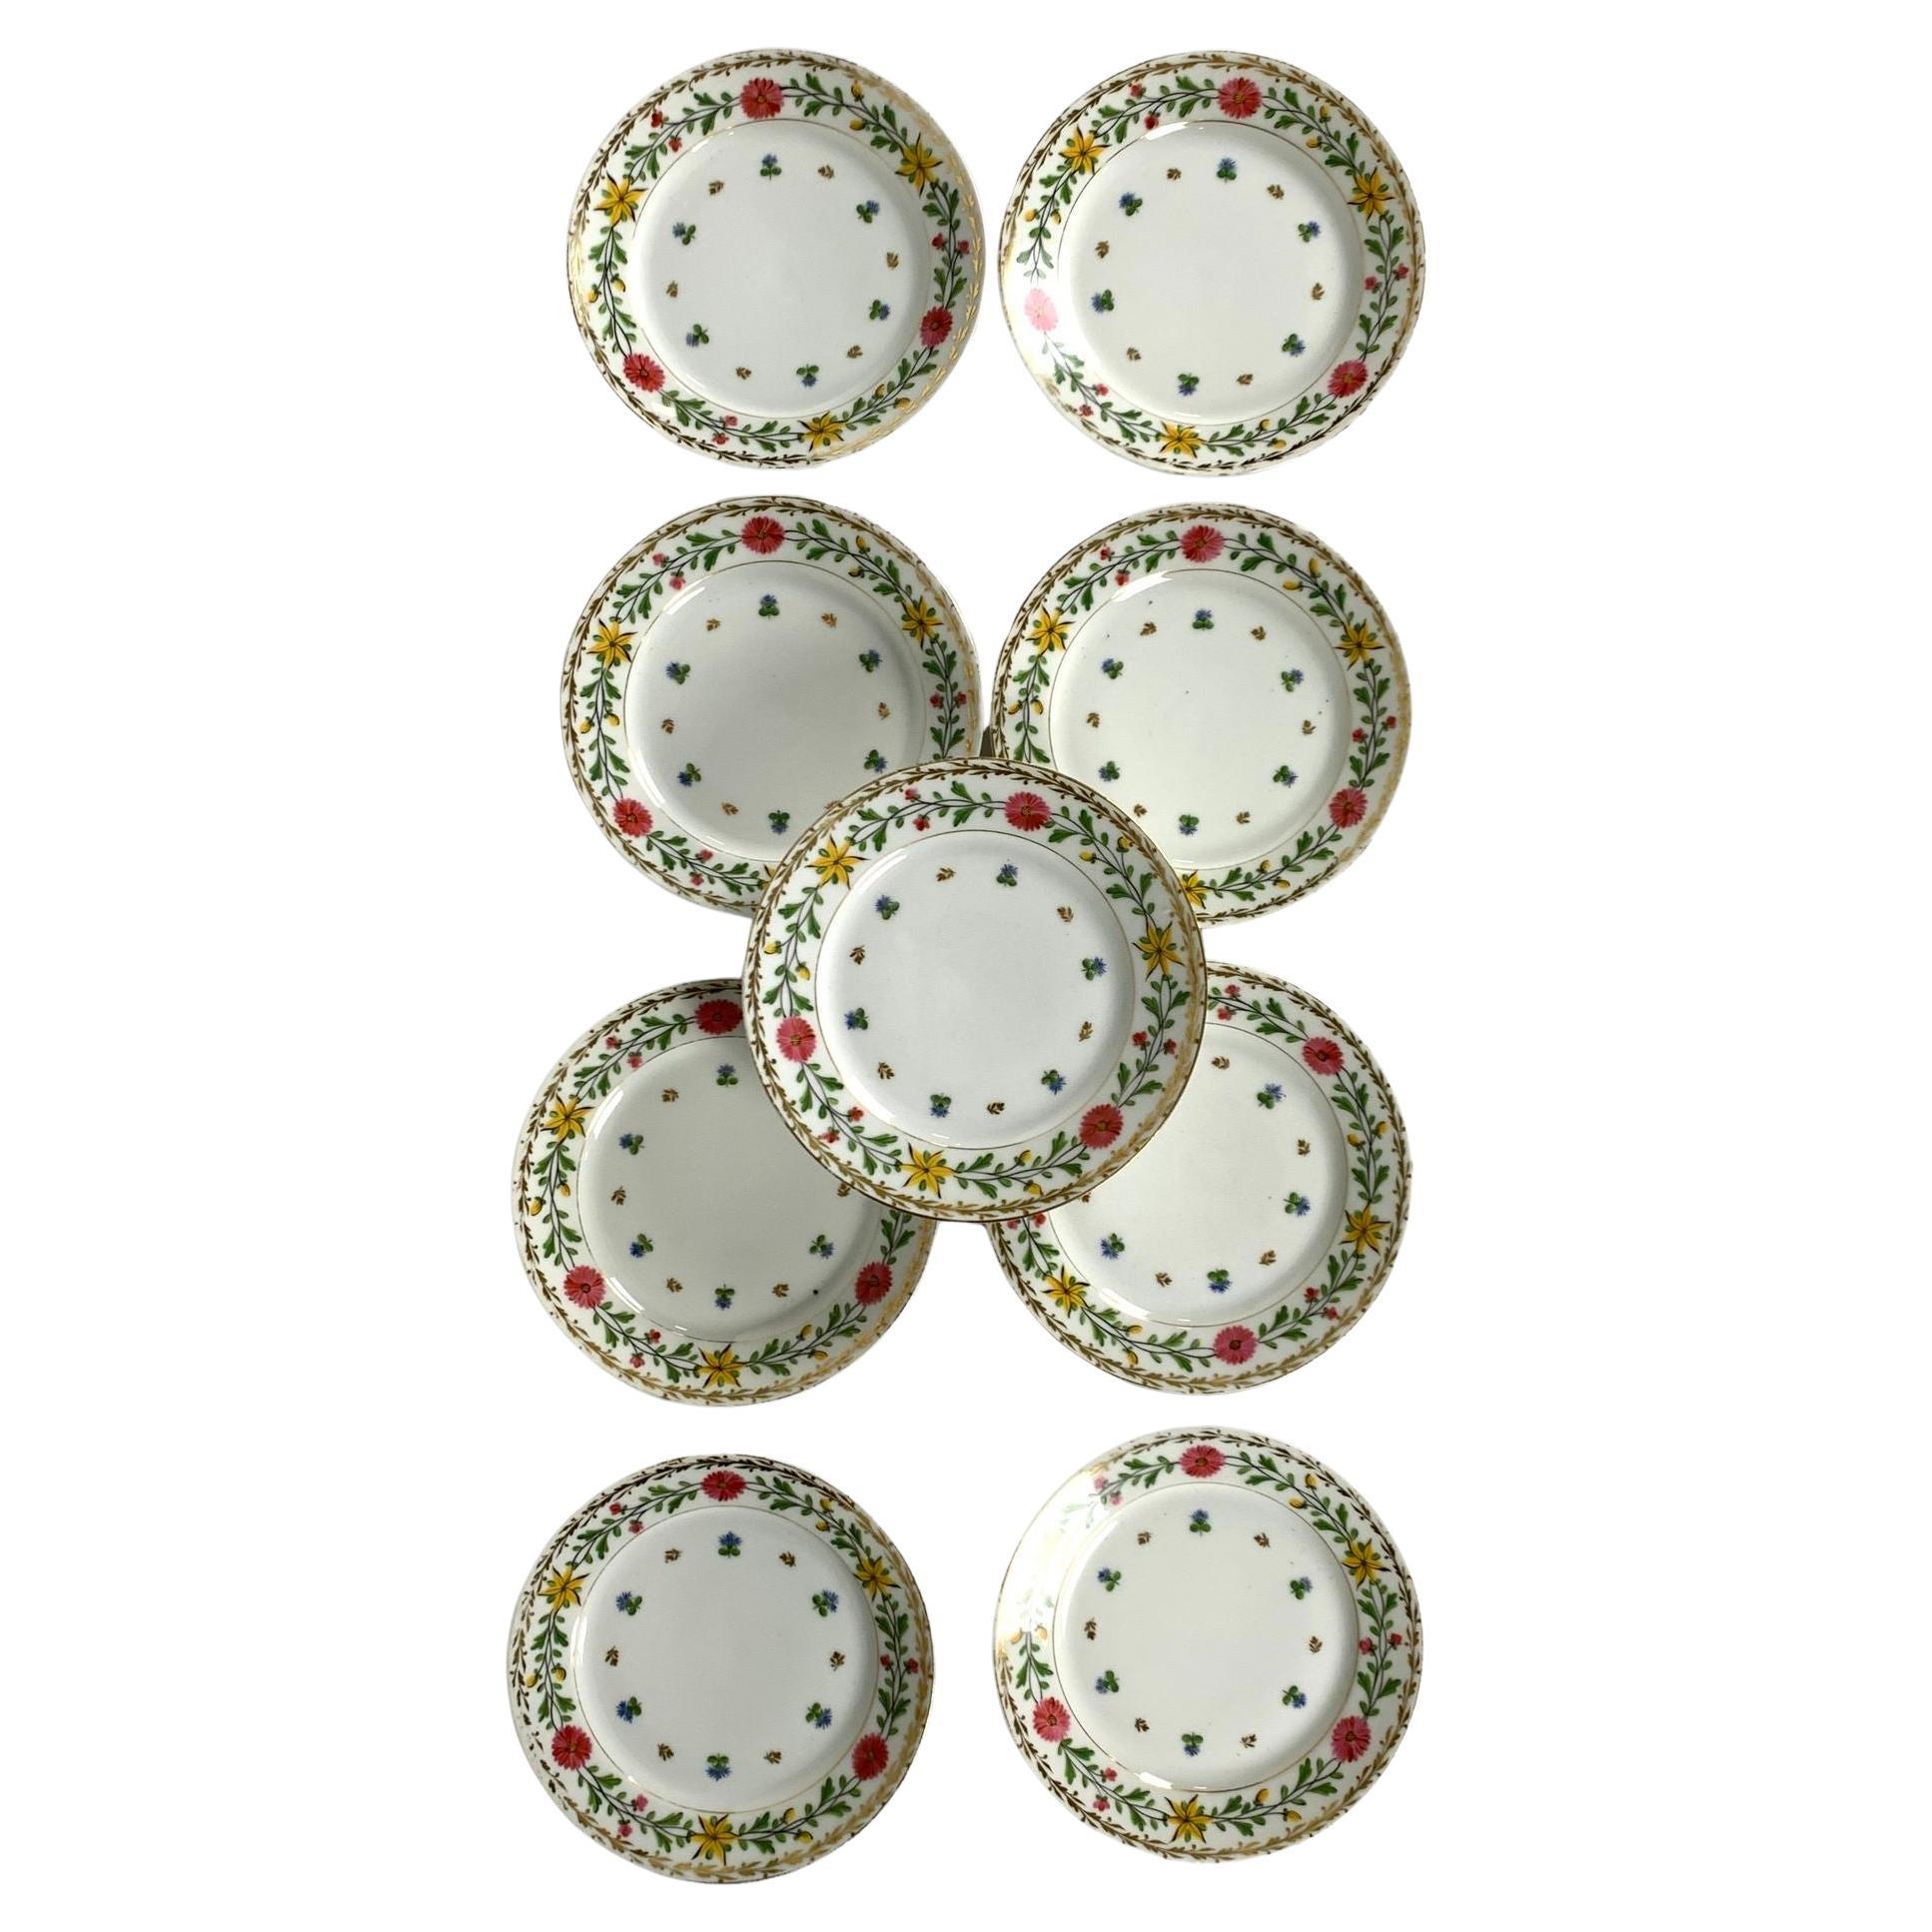 This set of nine lovely Vieux Paris dishes was made by Haviland Limoges in France circa 1876.
The border of the dishes features pink and yellow flowers on a vine with green leaves.
Additionally, there is a gilded wreath of leaves along the